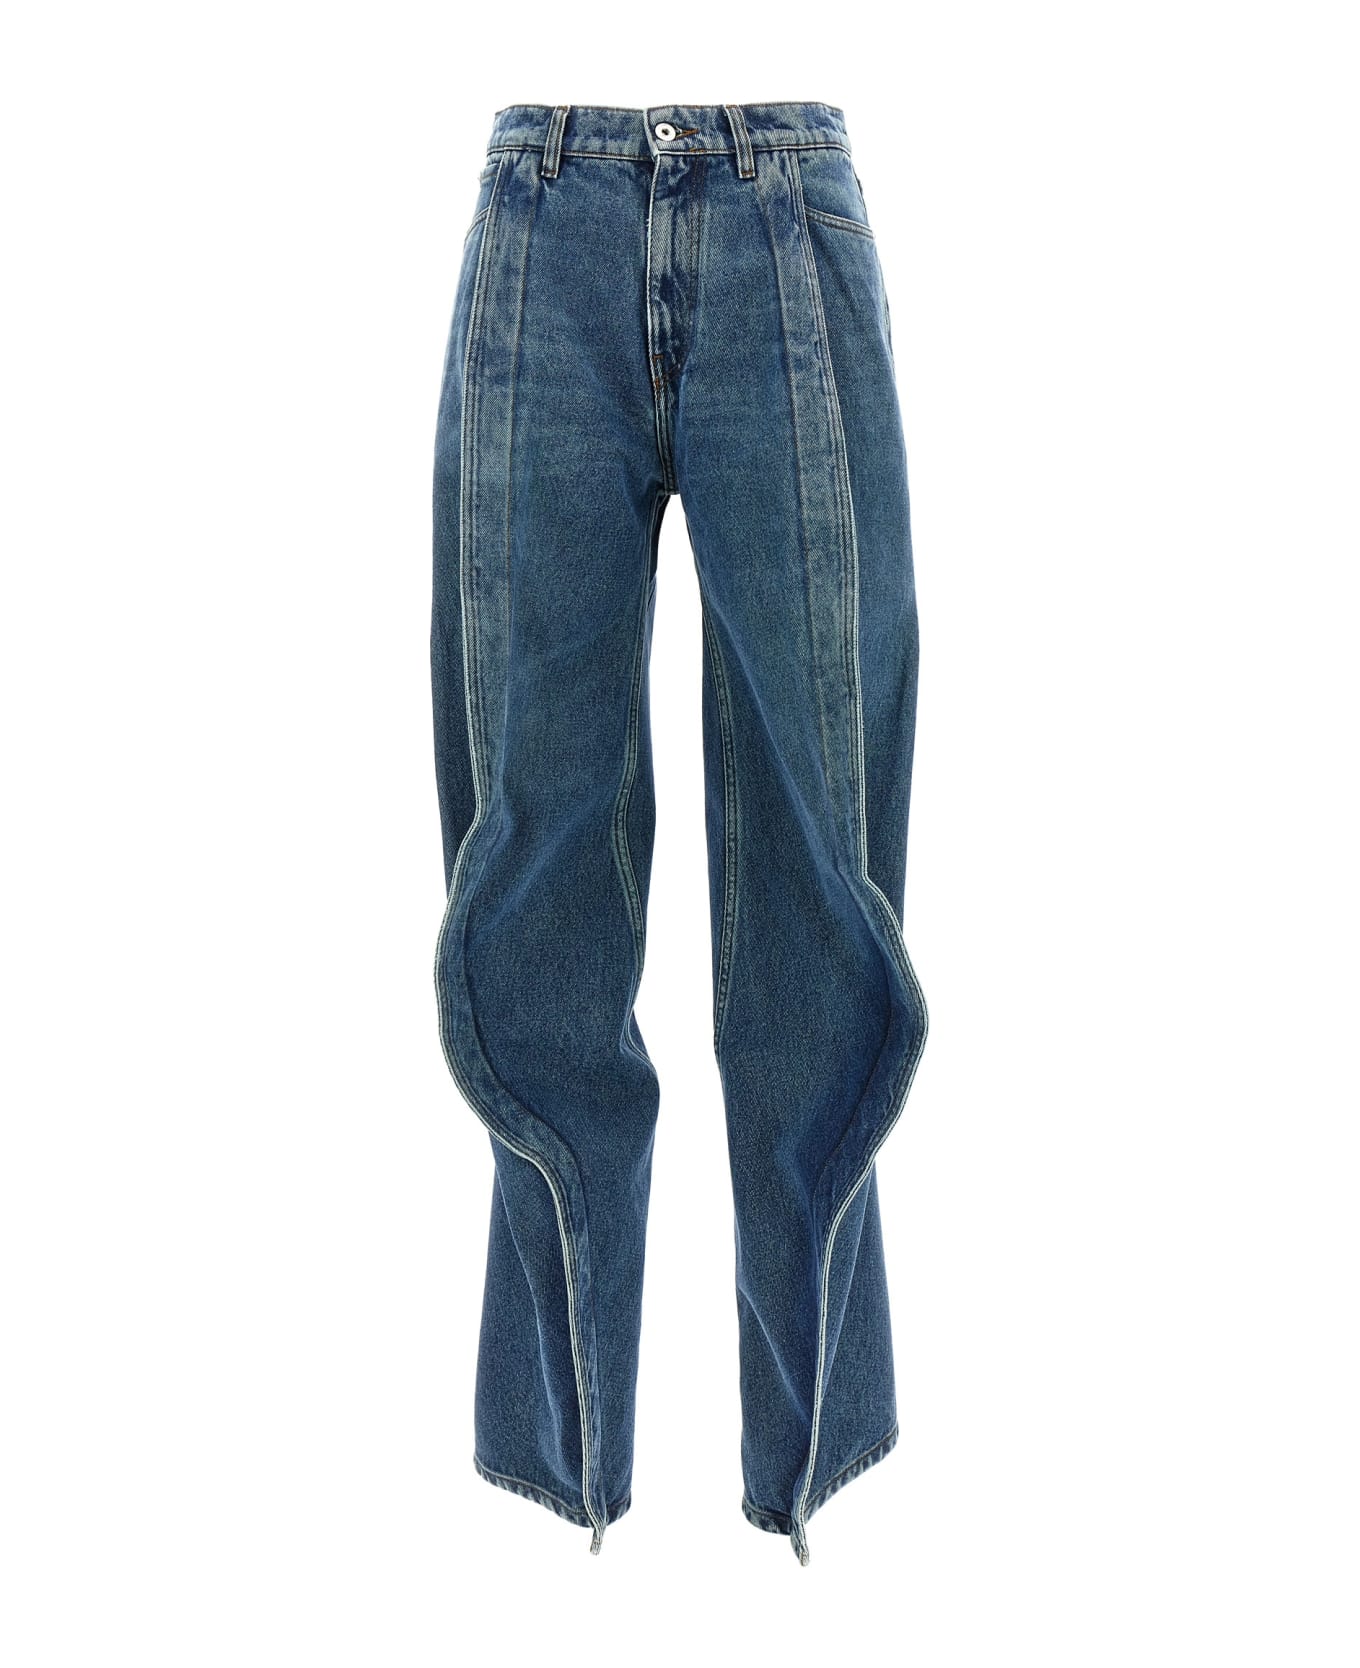 Y/Project 'evergreen Banana Jeans' Jeans - Blue